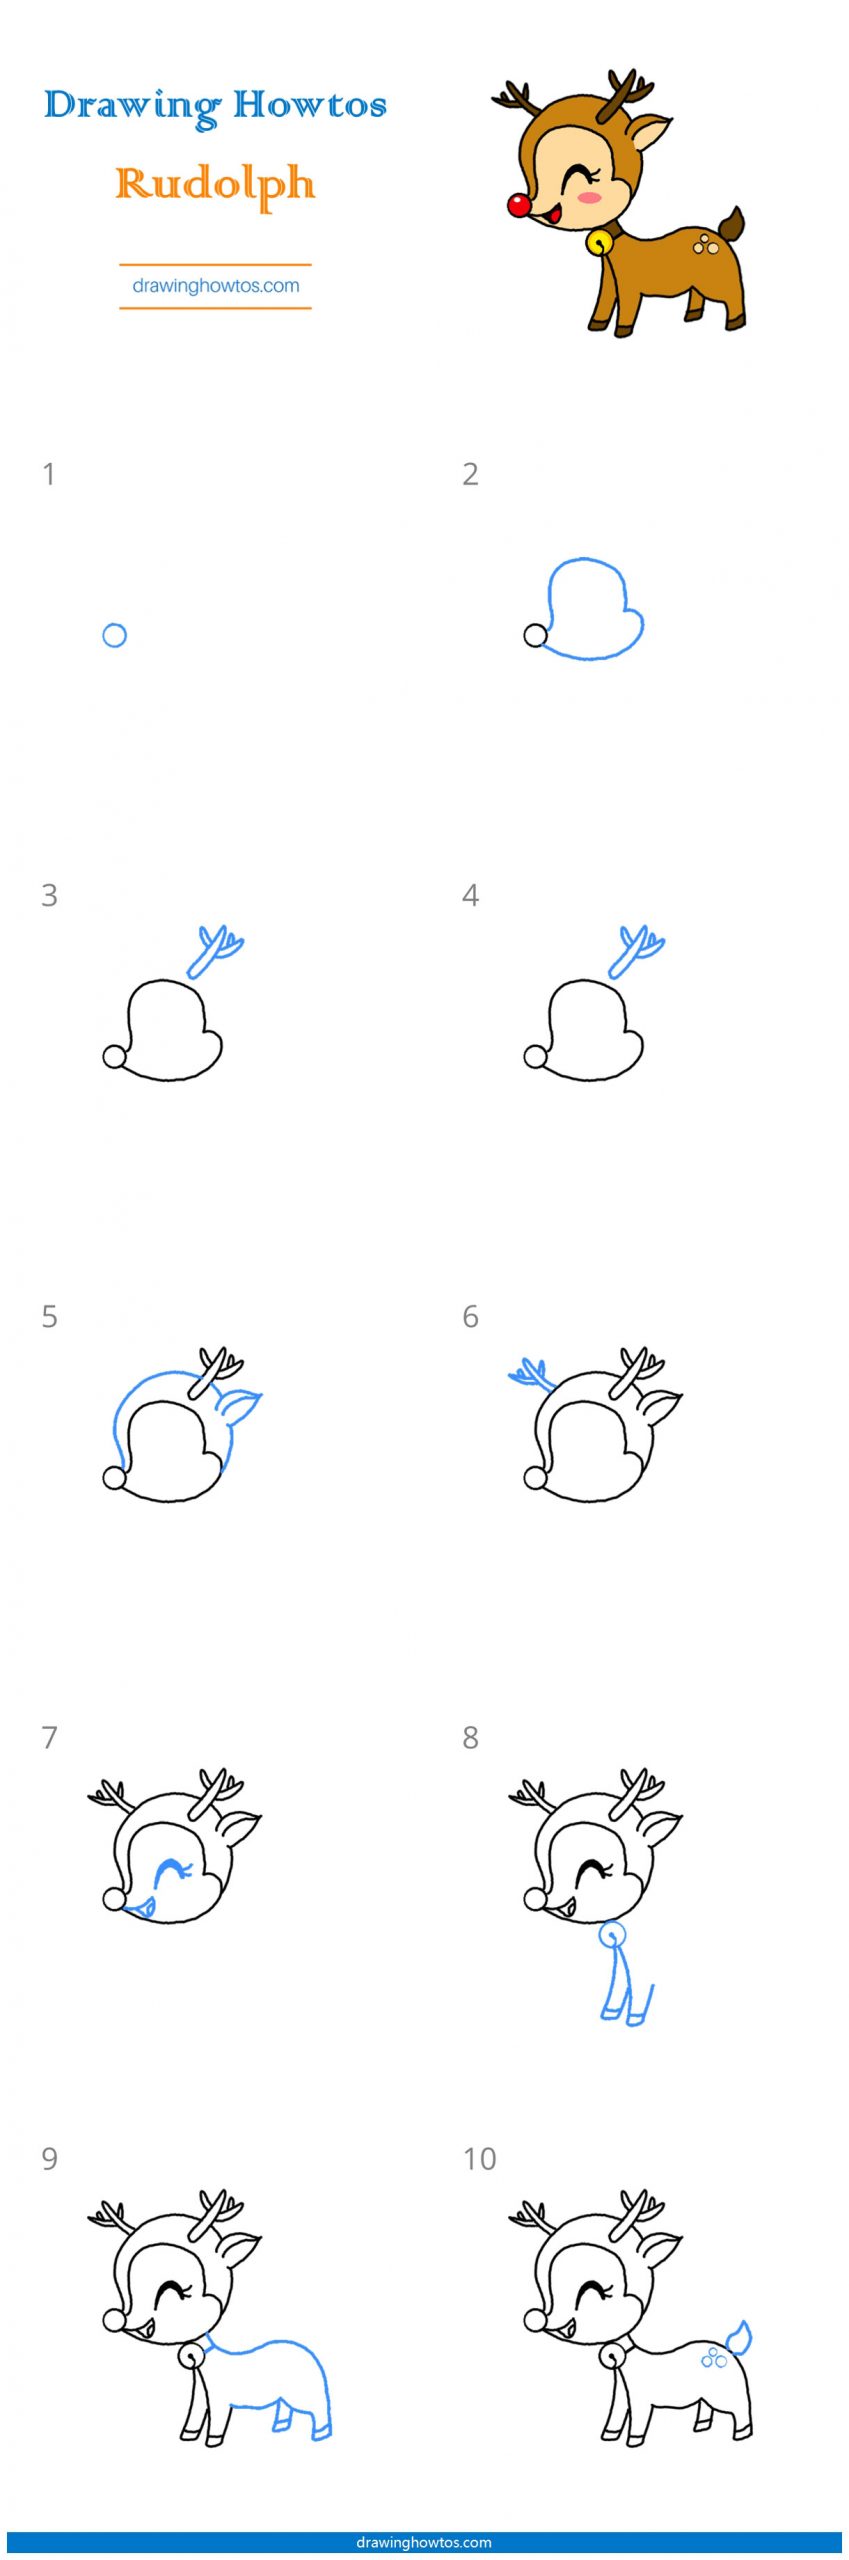 How to Draw Raindeer Rudolph Step by Step